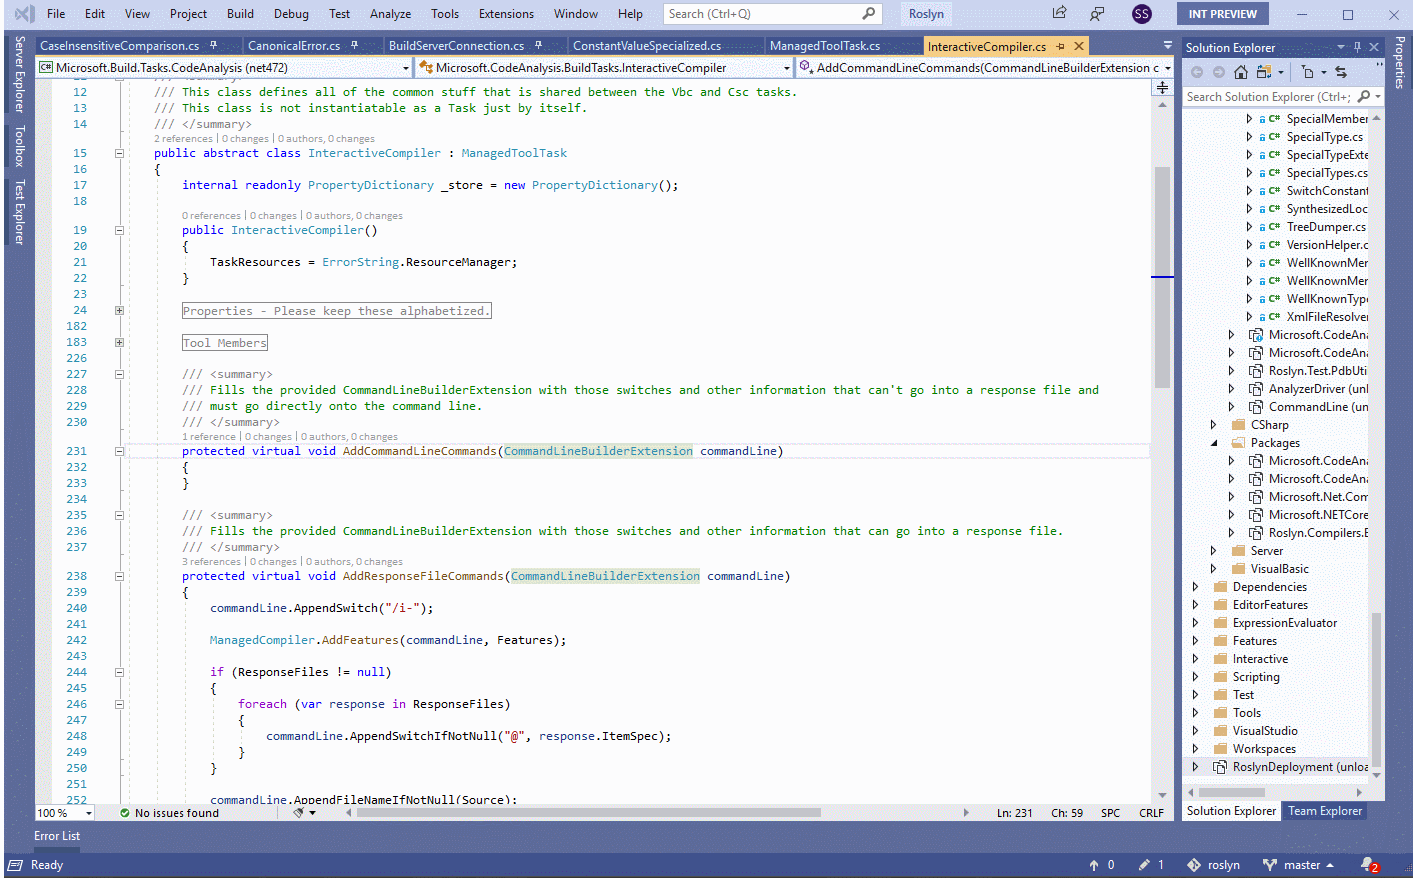 Shows the look of vertical tabs in the IDE